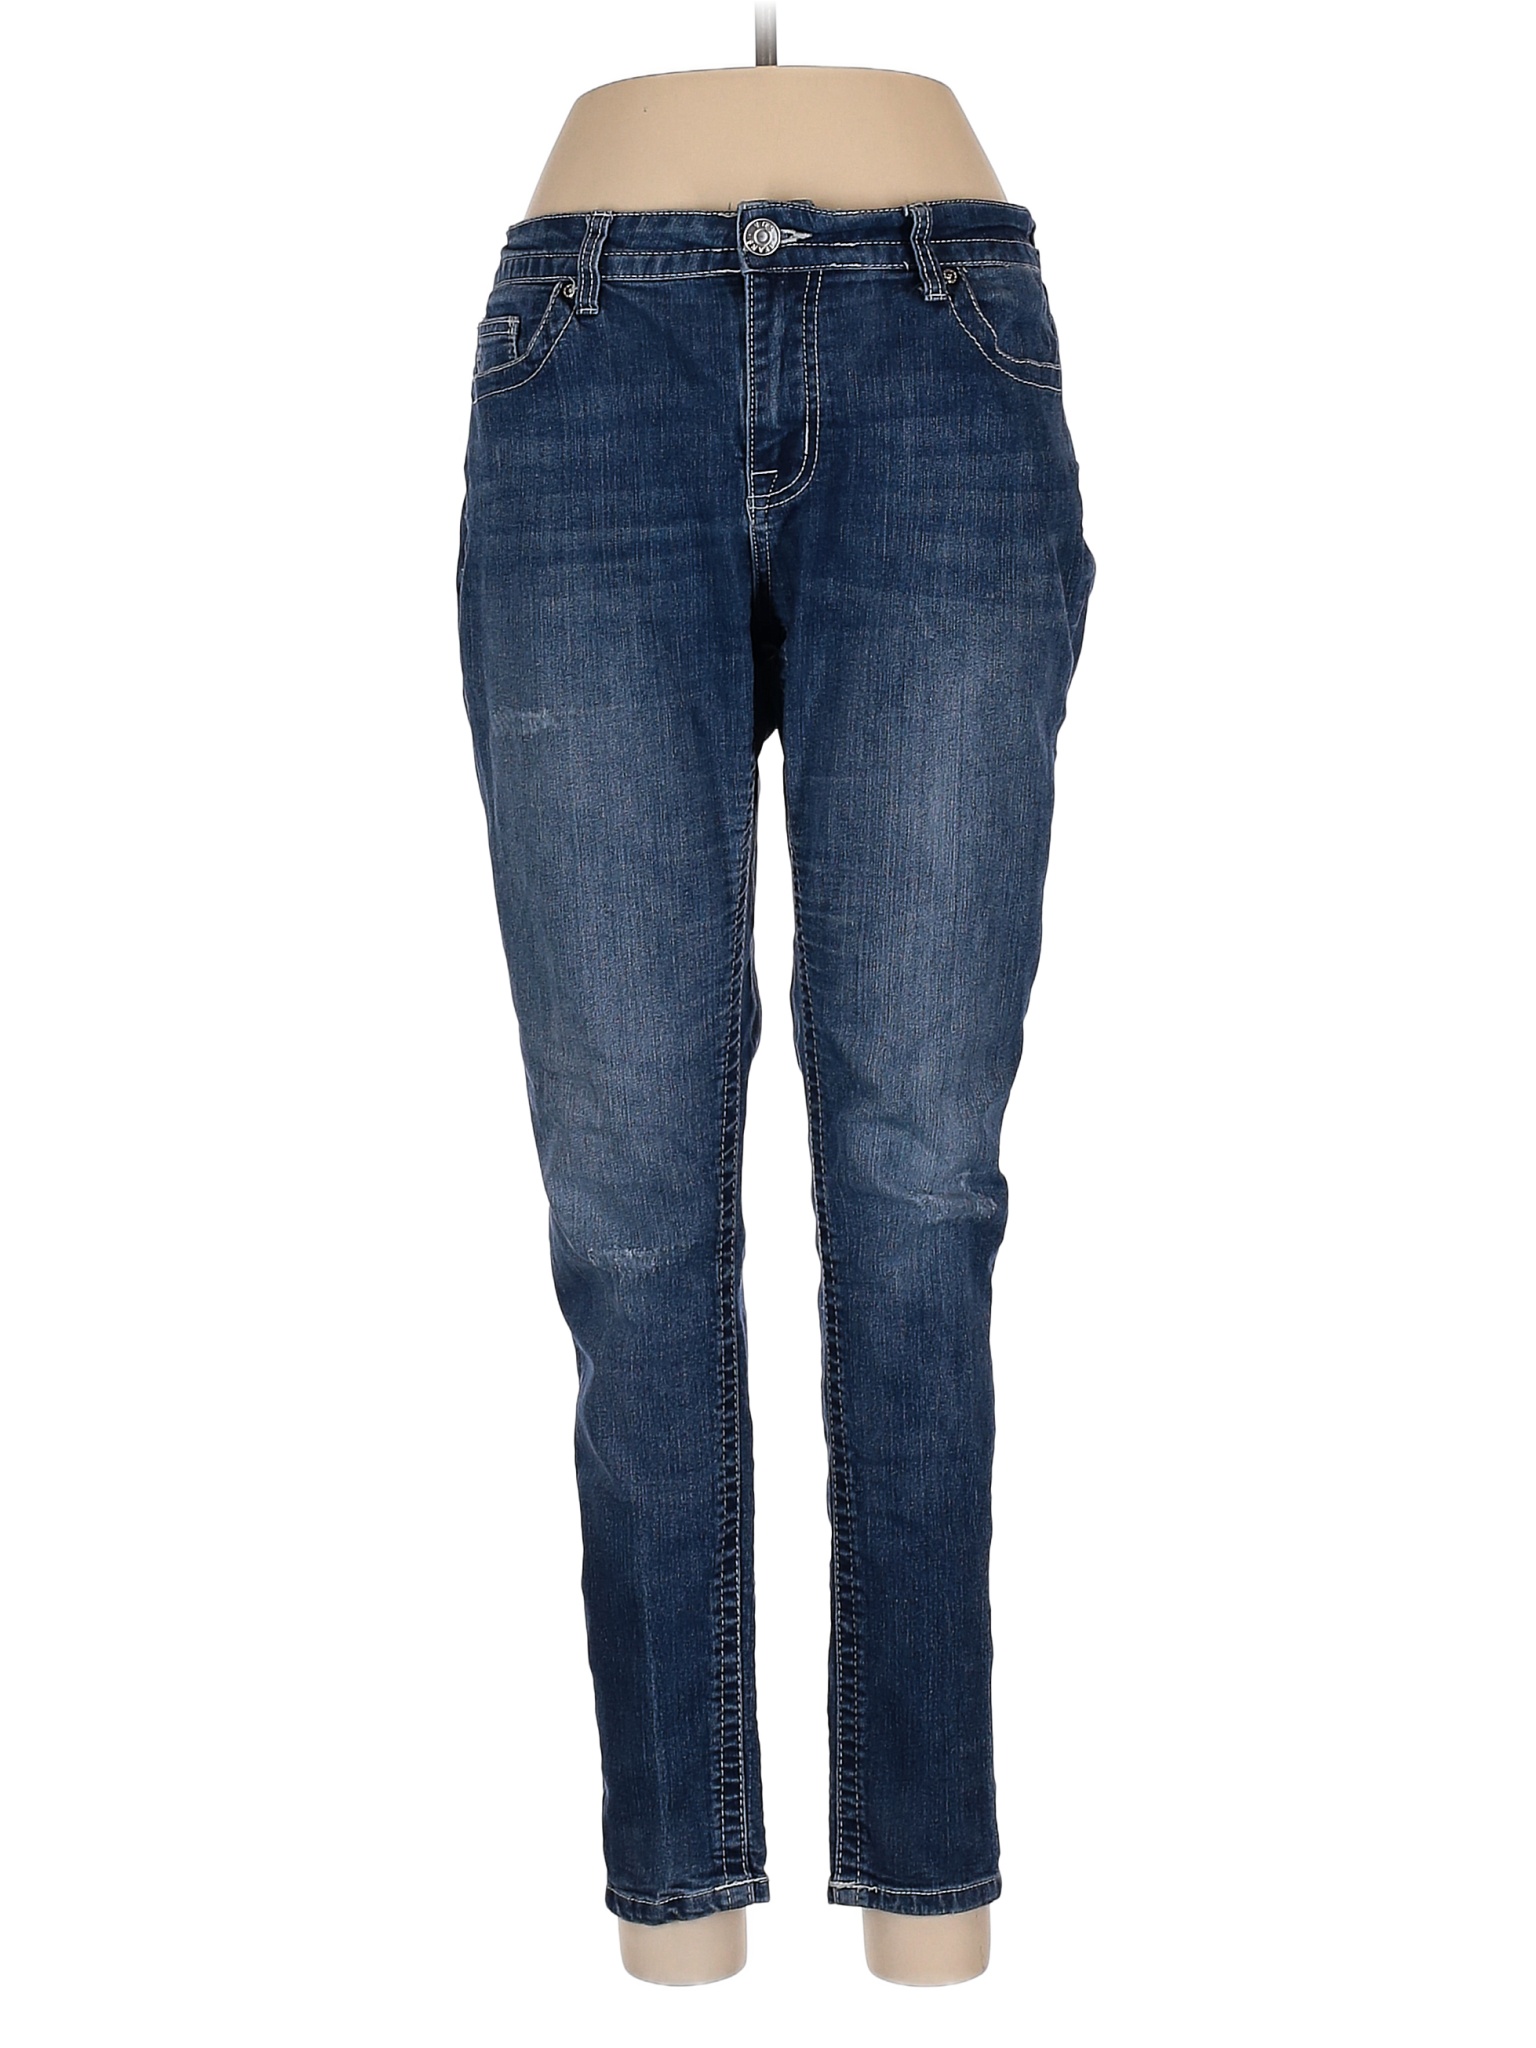 VGS Women's Jeans On Sale Up To 90% Off Retail | thredUP